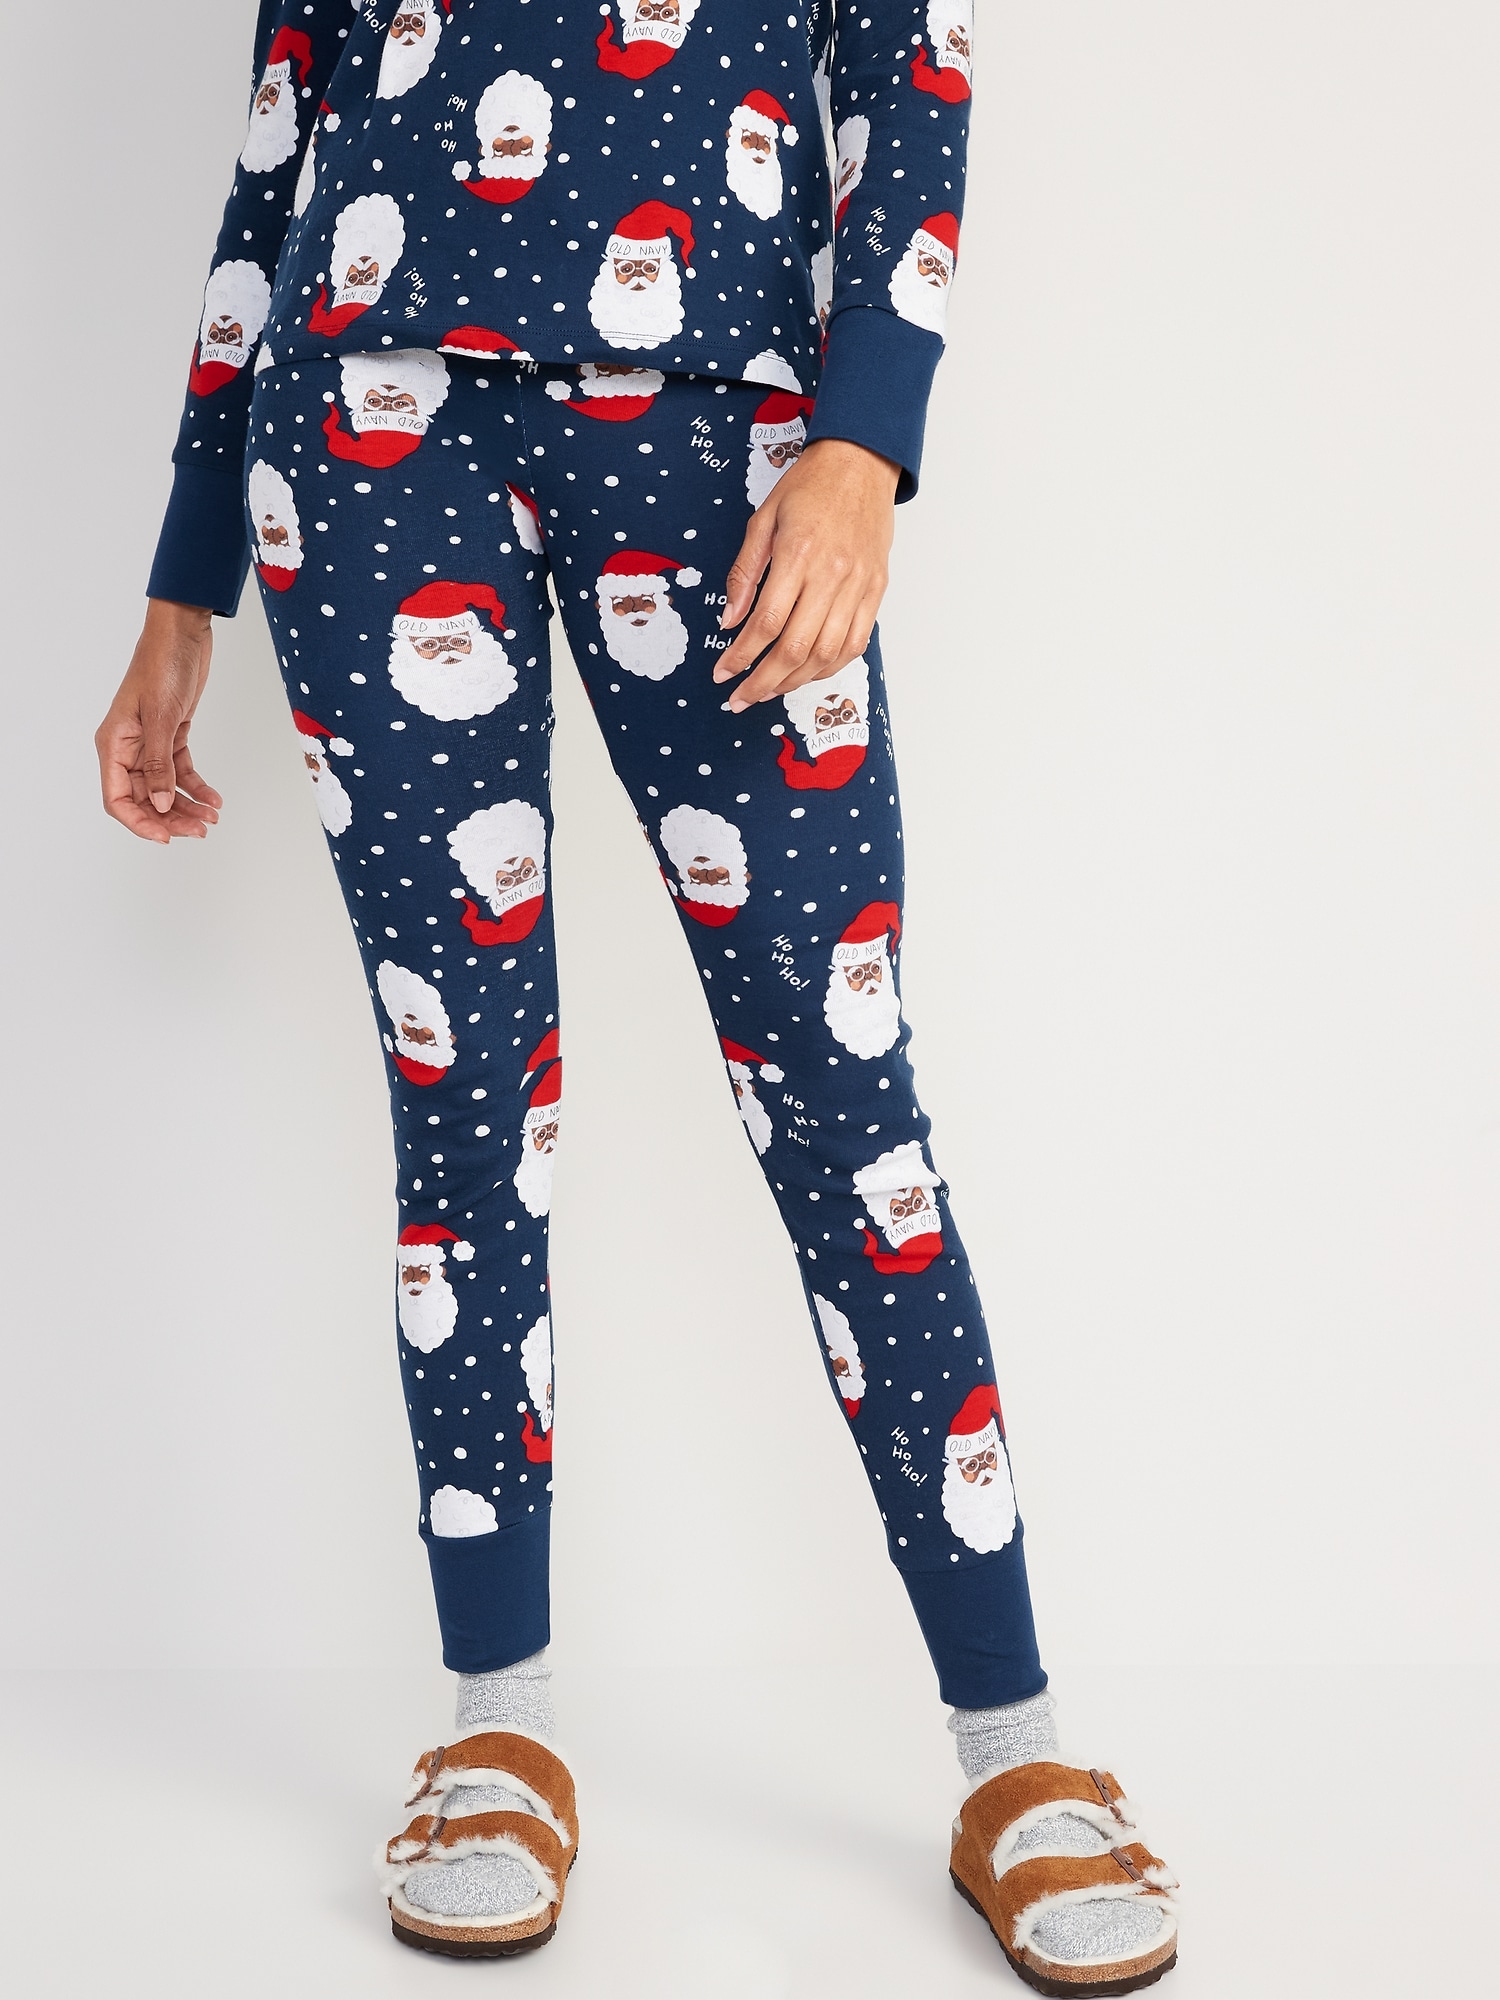 Old Navy Matching Printed Thermal-Knit Pajama Leggings for Women - ShopStyle